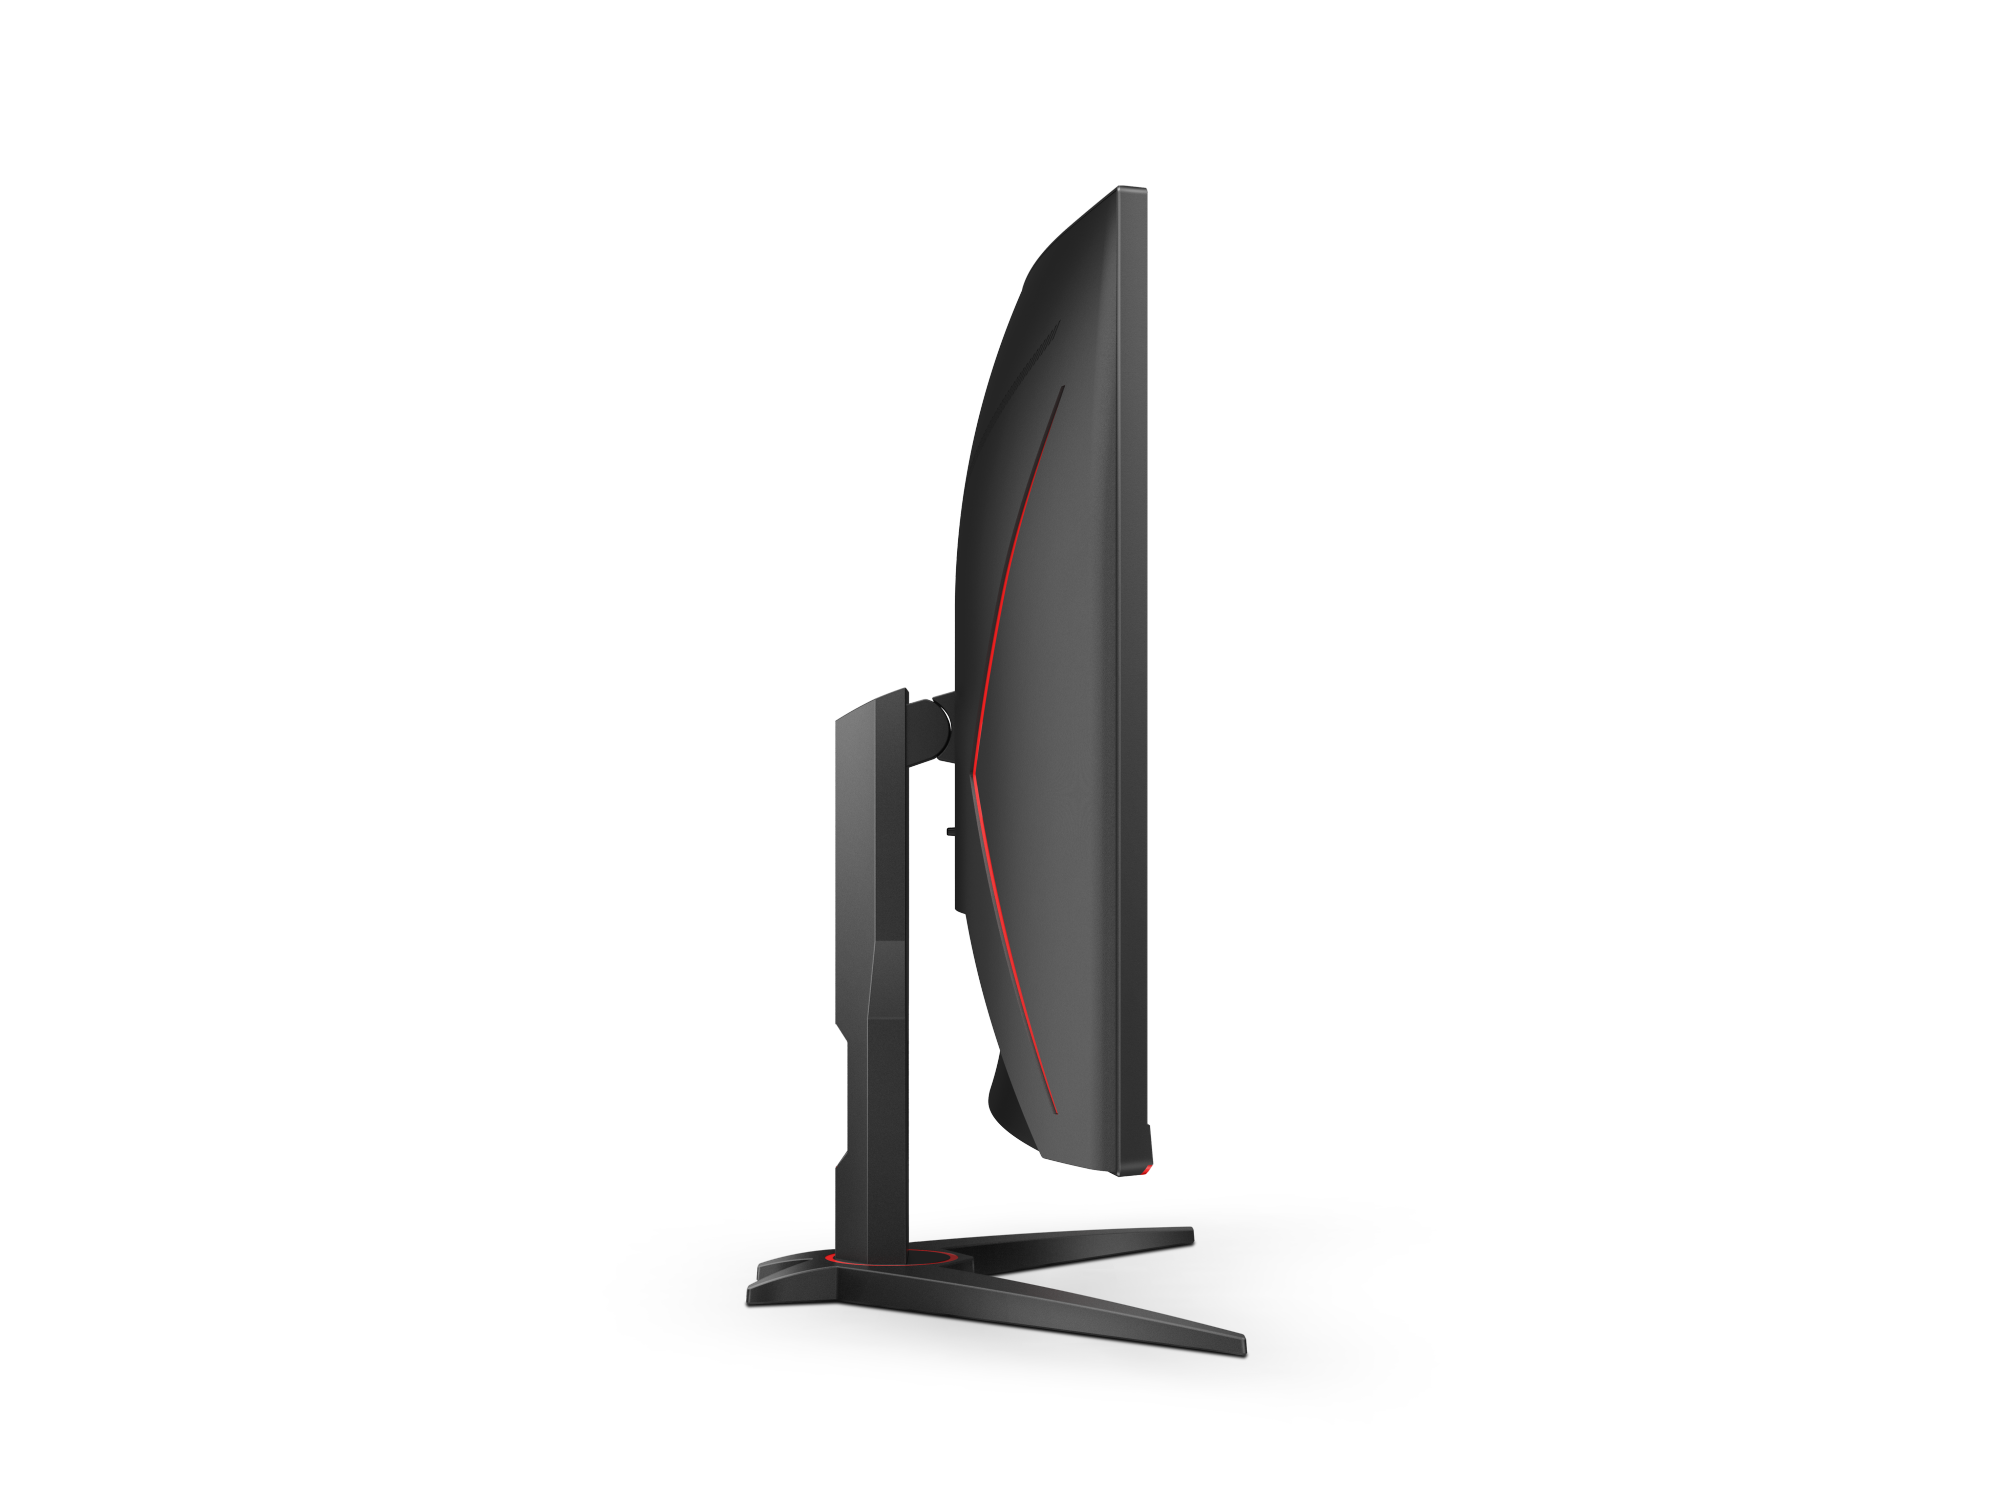  AOC C32G2 32 Curved Frameless Gaming Monitor FHD, 1500R Curved  VA, 1ms, 165Hz, FreeSync, Height adjustable, 3-Year Zero Dead Pixel Policy,  Black : Electronics